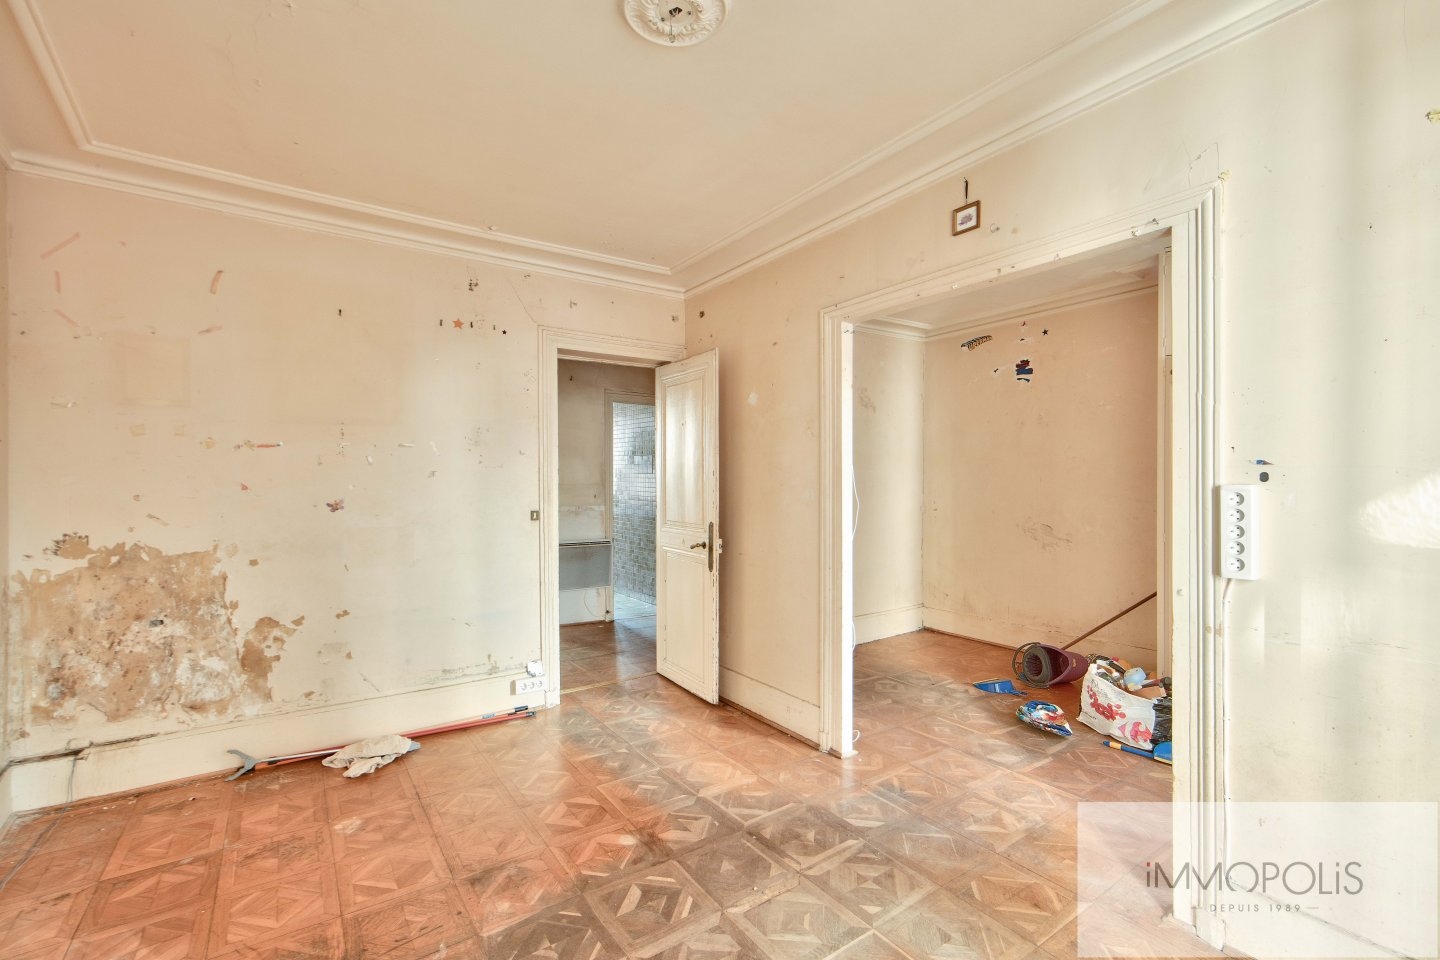 Apartment to be renovated in the heart of the abbesses. 5